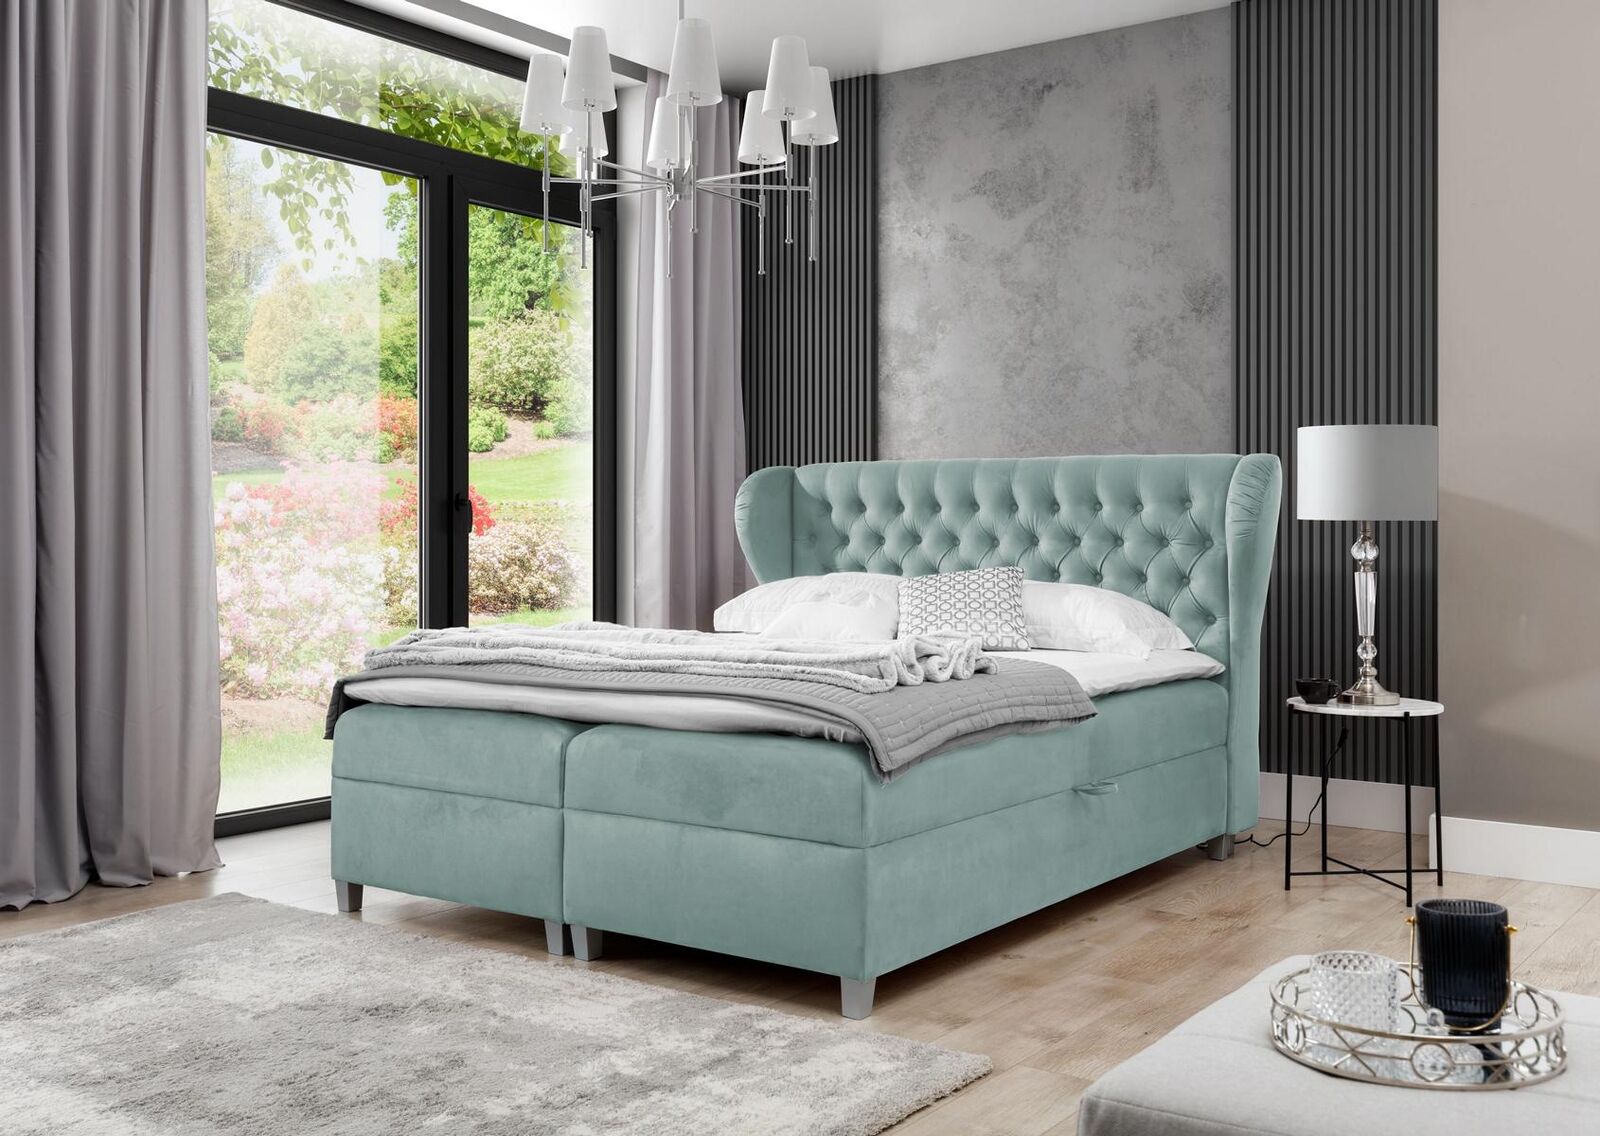 Bedroom Modern Bed Chesterfield Furnishings Upholstered Bed Wood Design Furniture